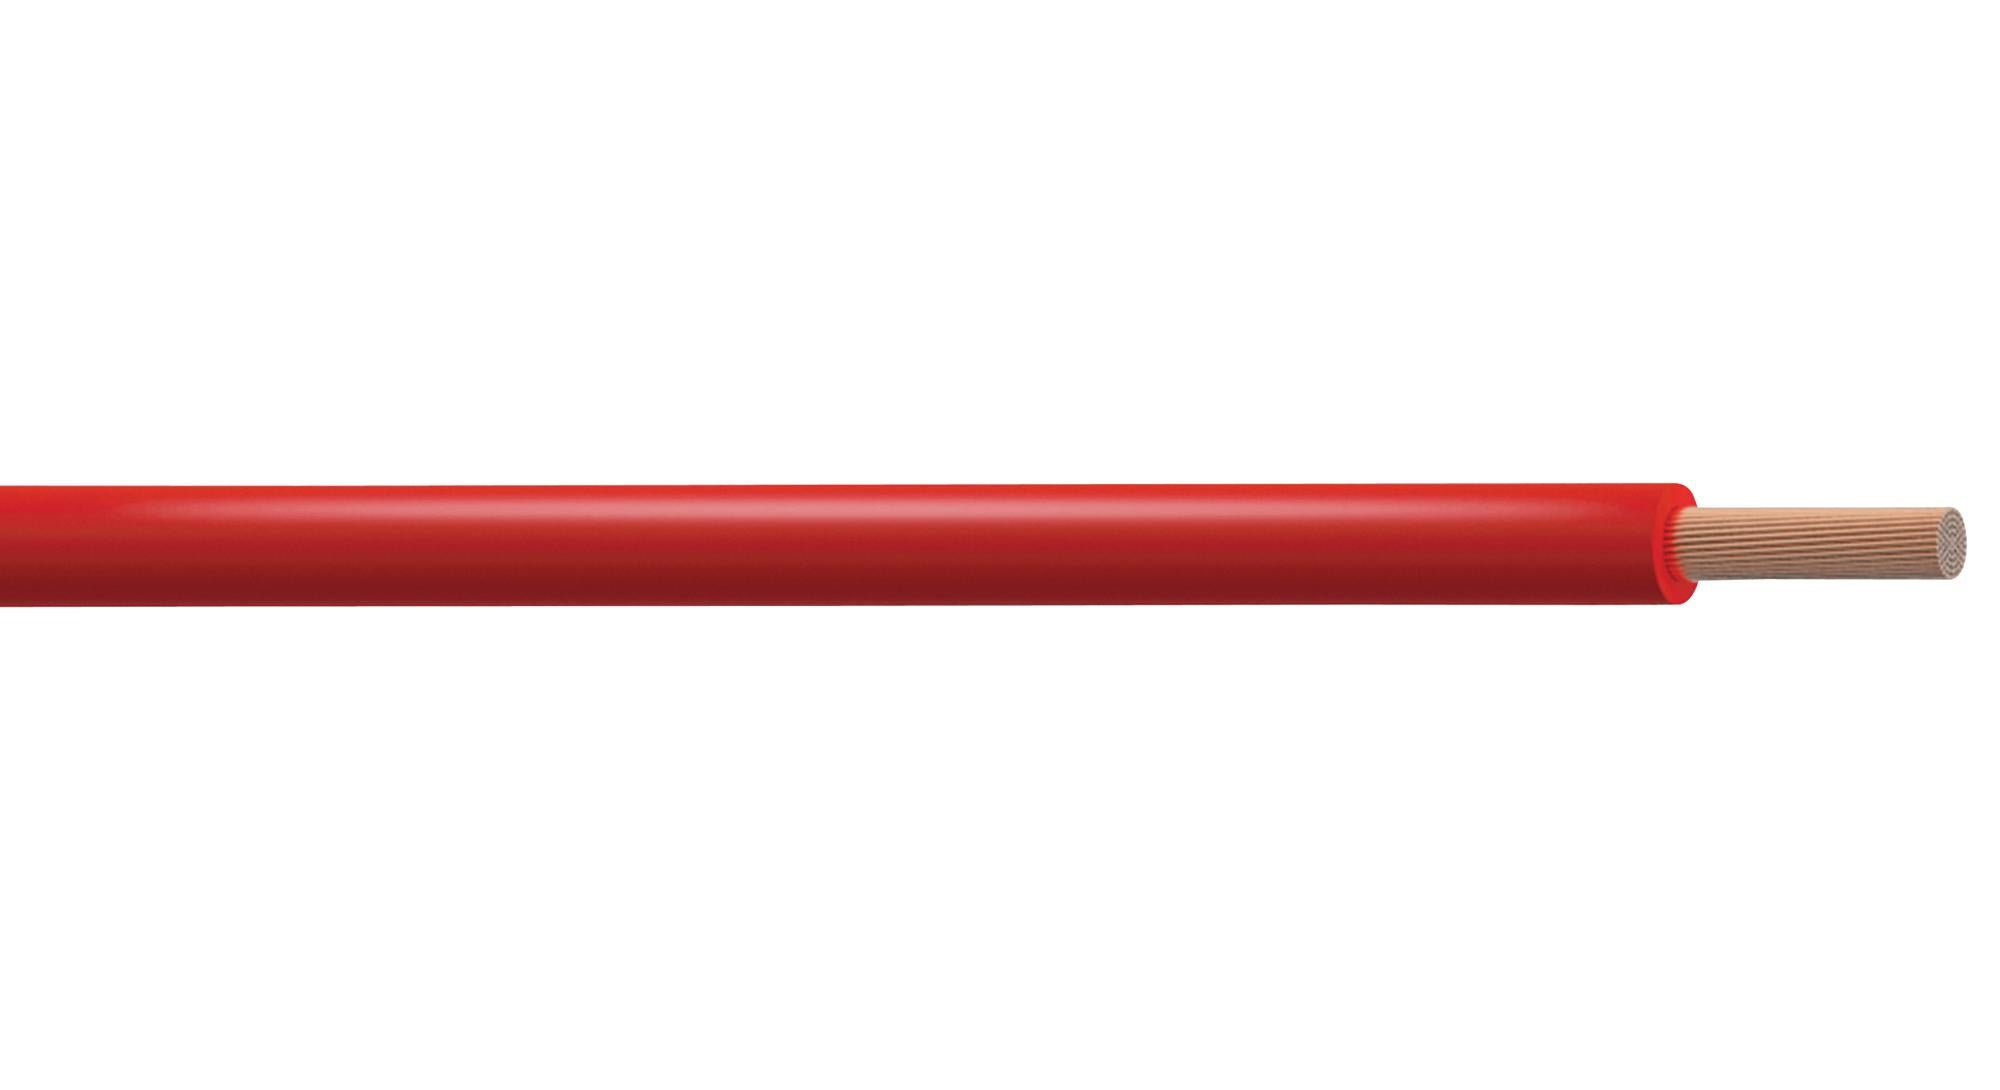 MULTICOMP PRO Single Wire PP001322 TRI RATED WIRE, 1.5MM2, RED, 500M MULTICOMP PRO 2543497 PP001322